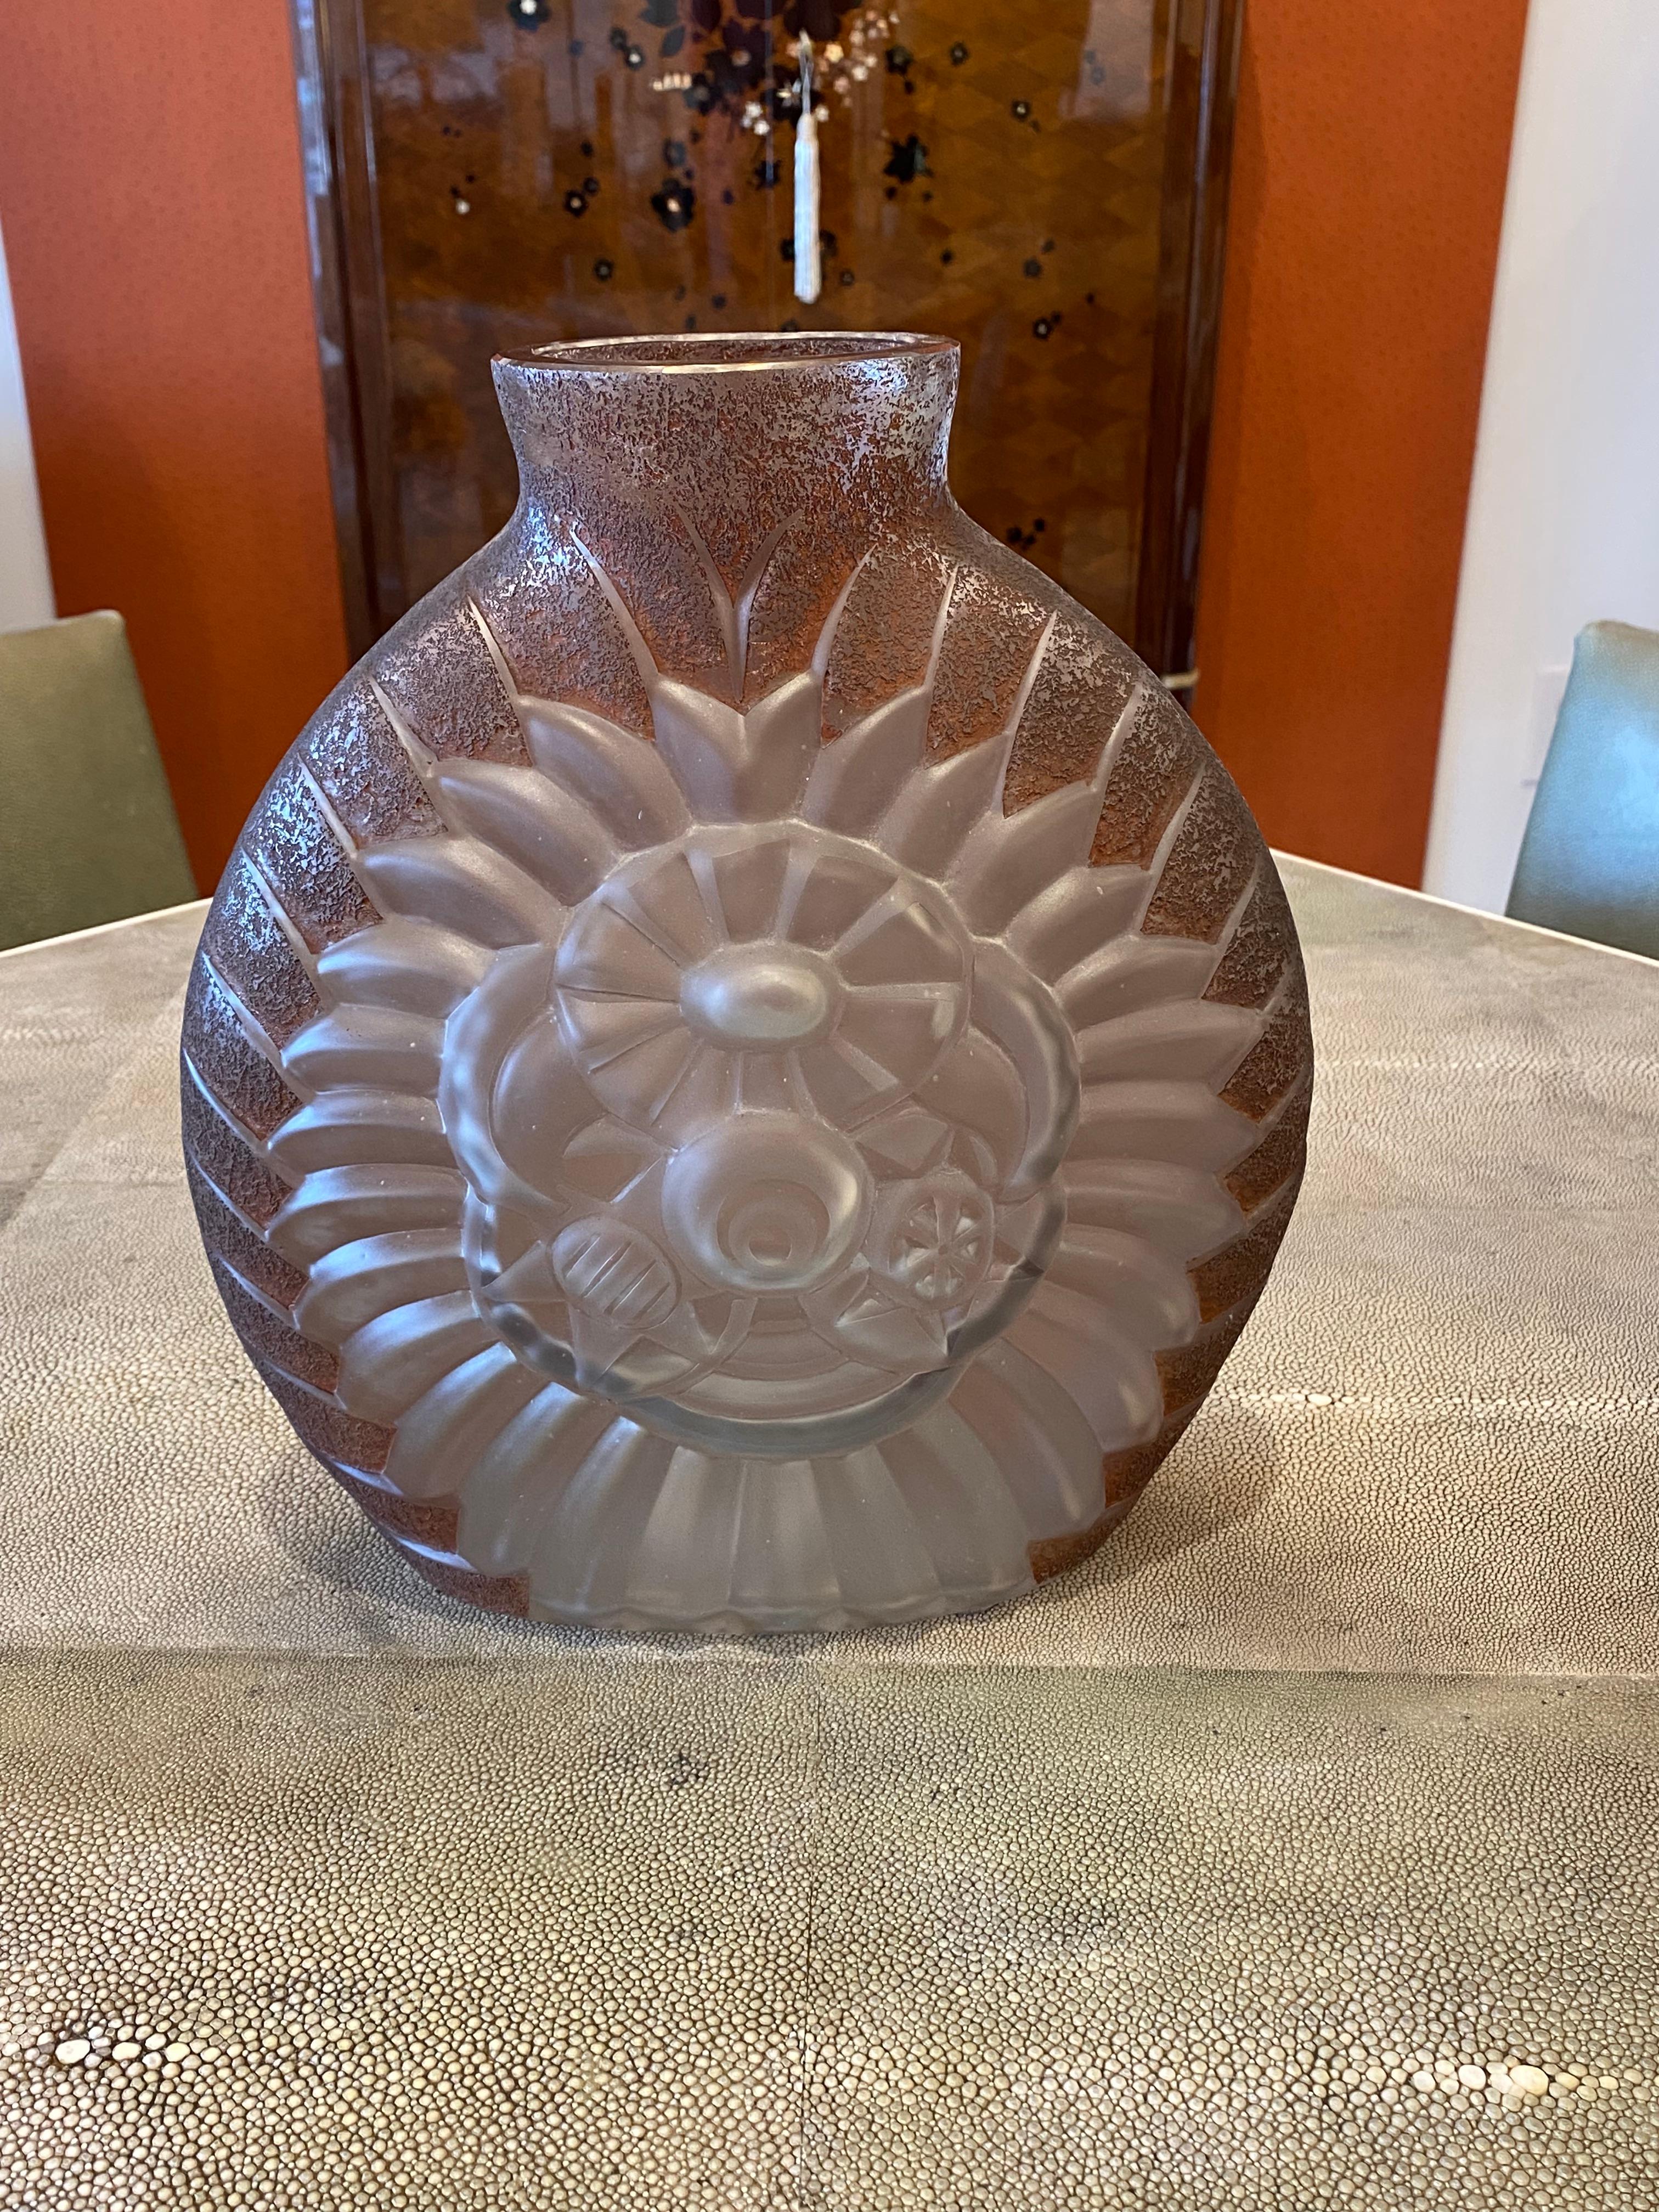 Art Deco molded glass and acid etched glass vase by D. Gueron (Degue) depicting Deco flowers bouquet.
Made in France 
Circa: 1930
Signature: Gueron.